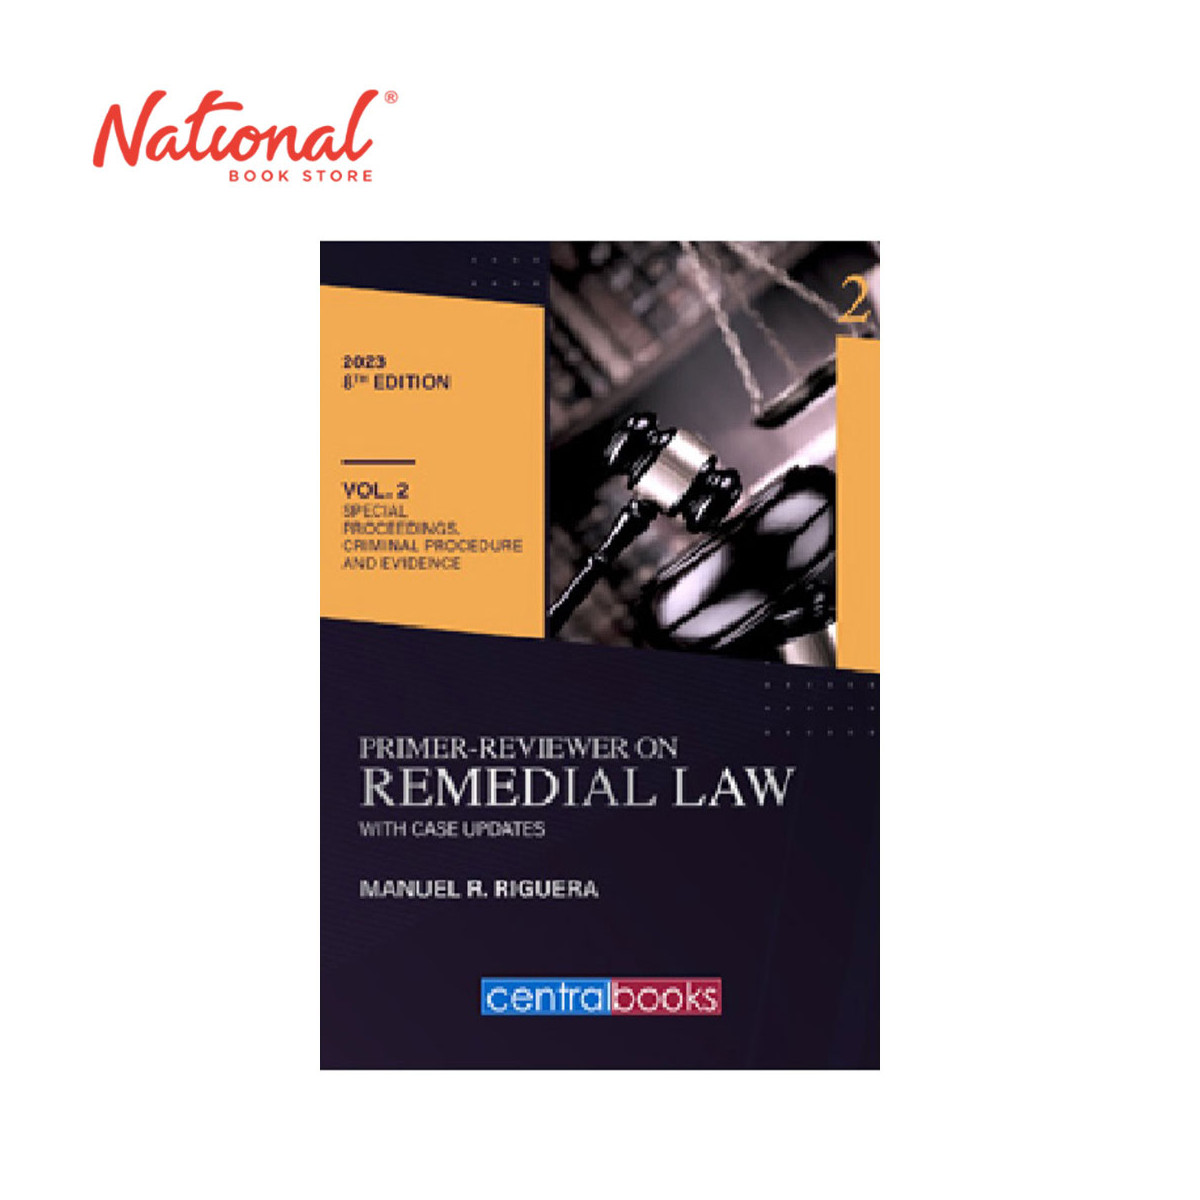 *SPECIAL ORDER* Primer-Reviewer on Remedial Law Volume 2 by Prof. Manuel Riguera - Trade Paperback - College Books